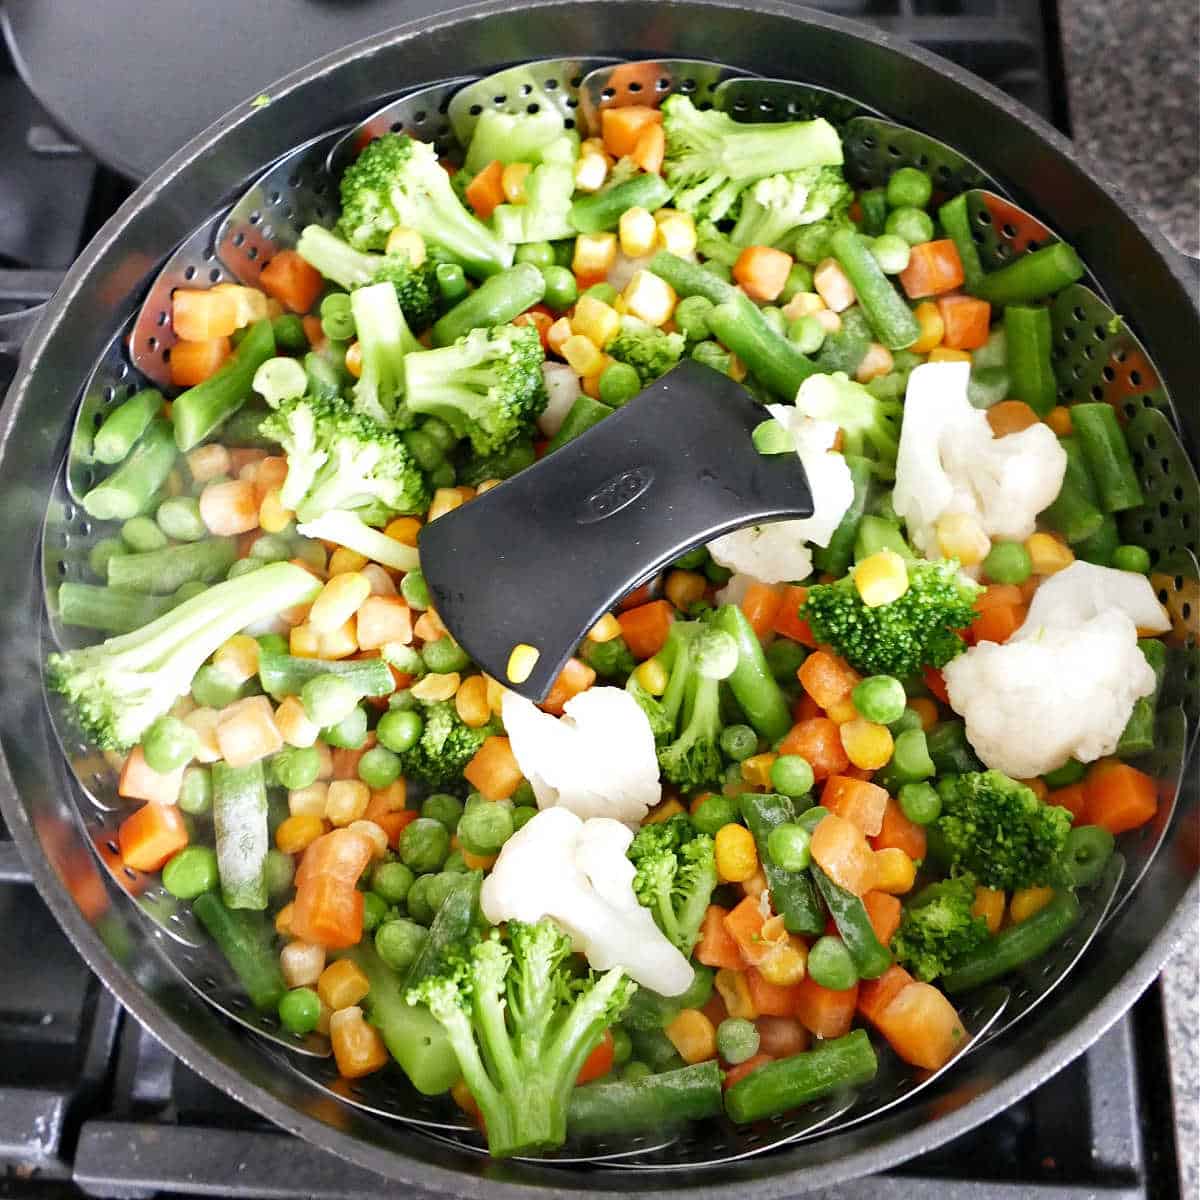 mixed vegetables cooking in a steamer basket over a pot